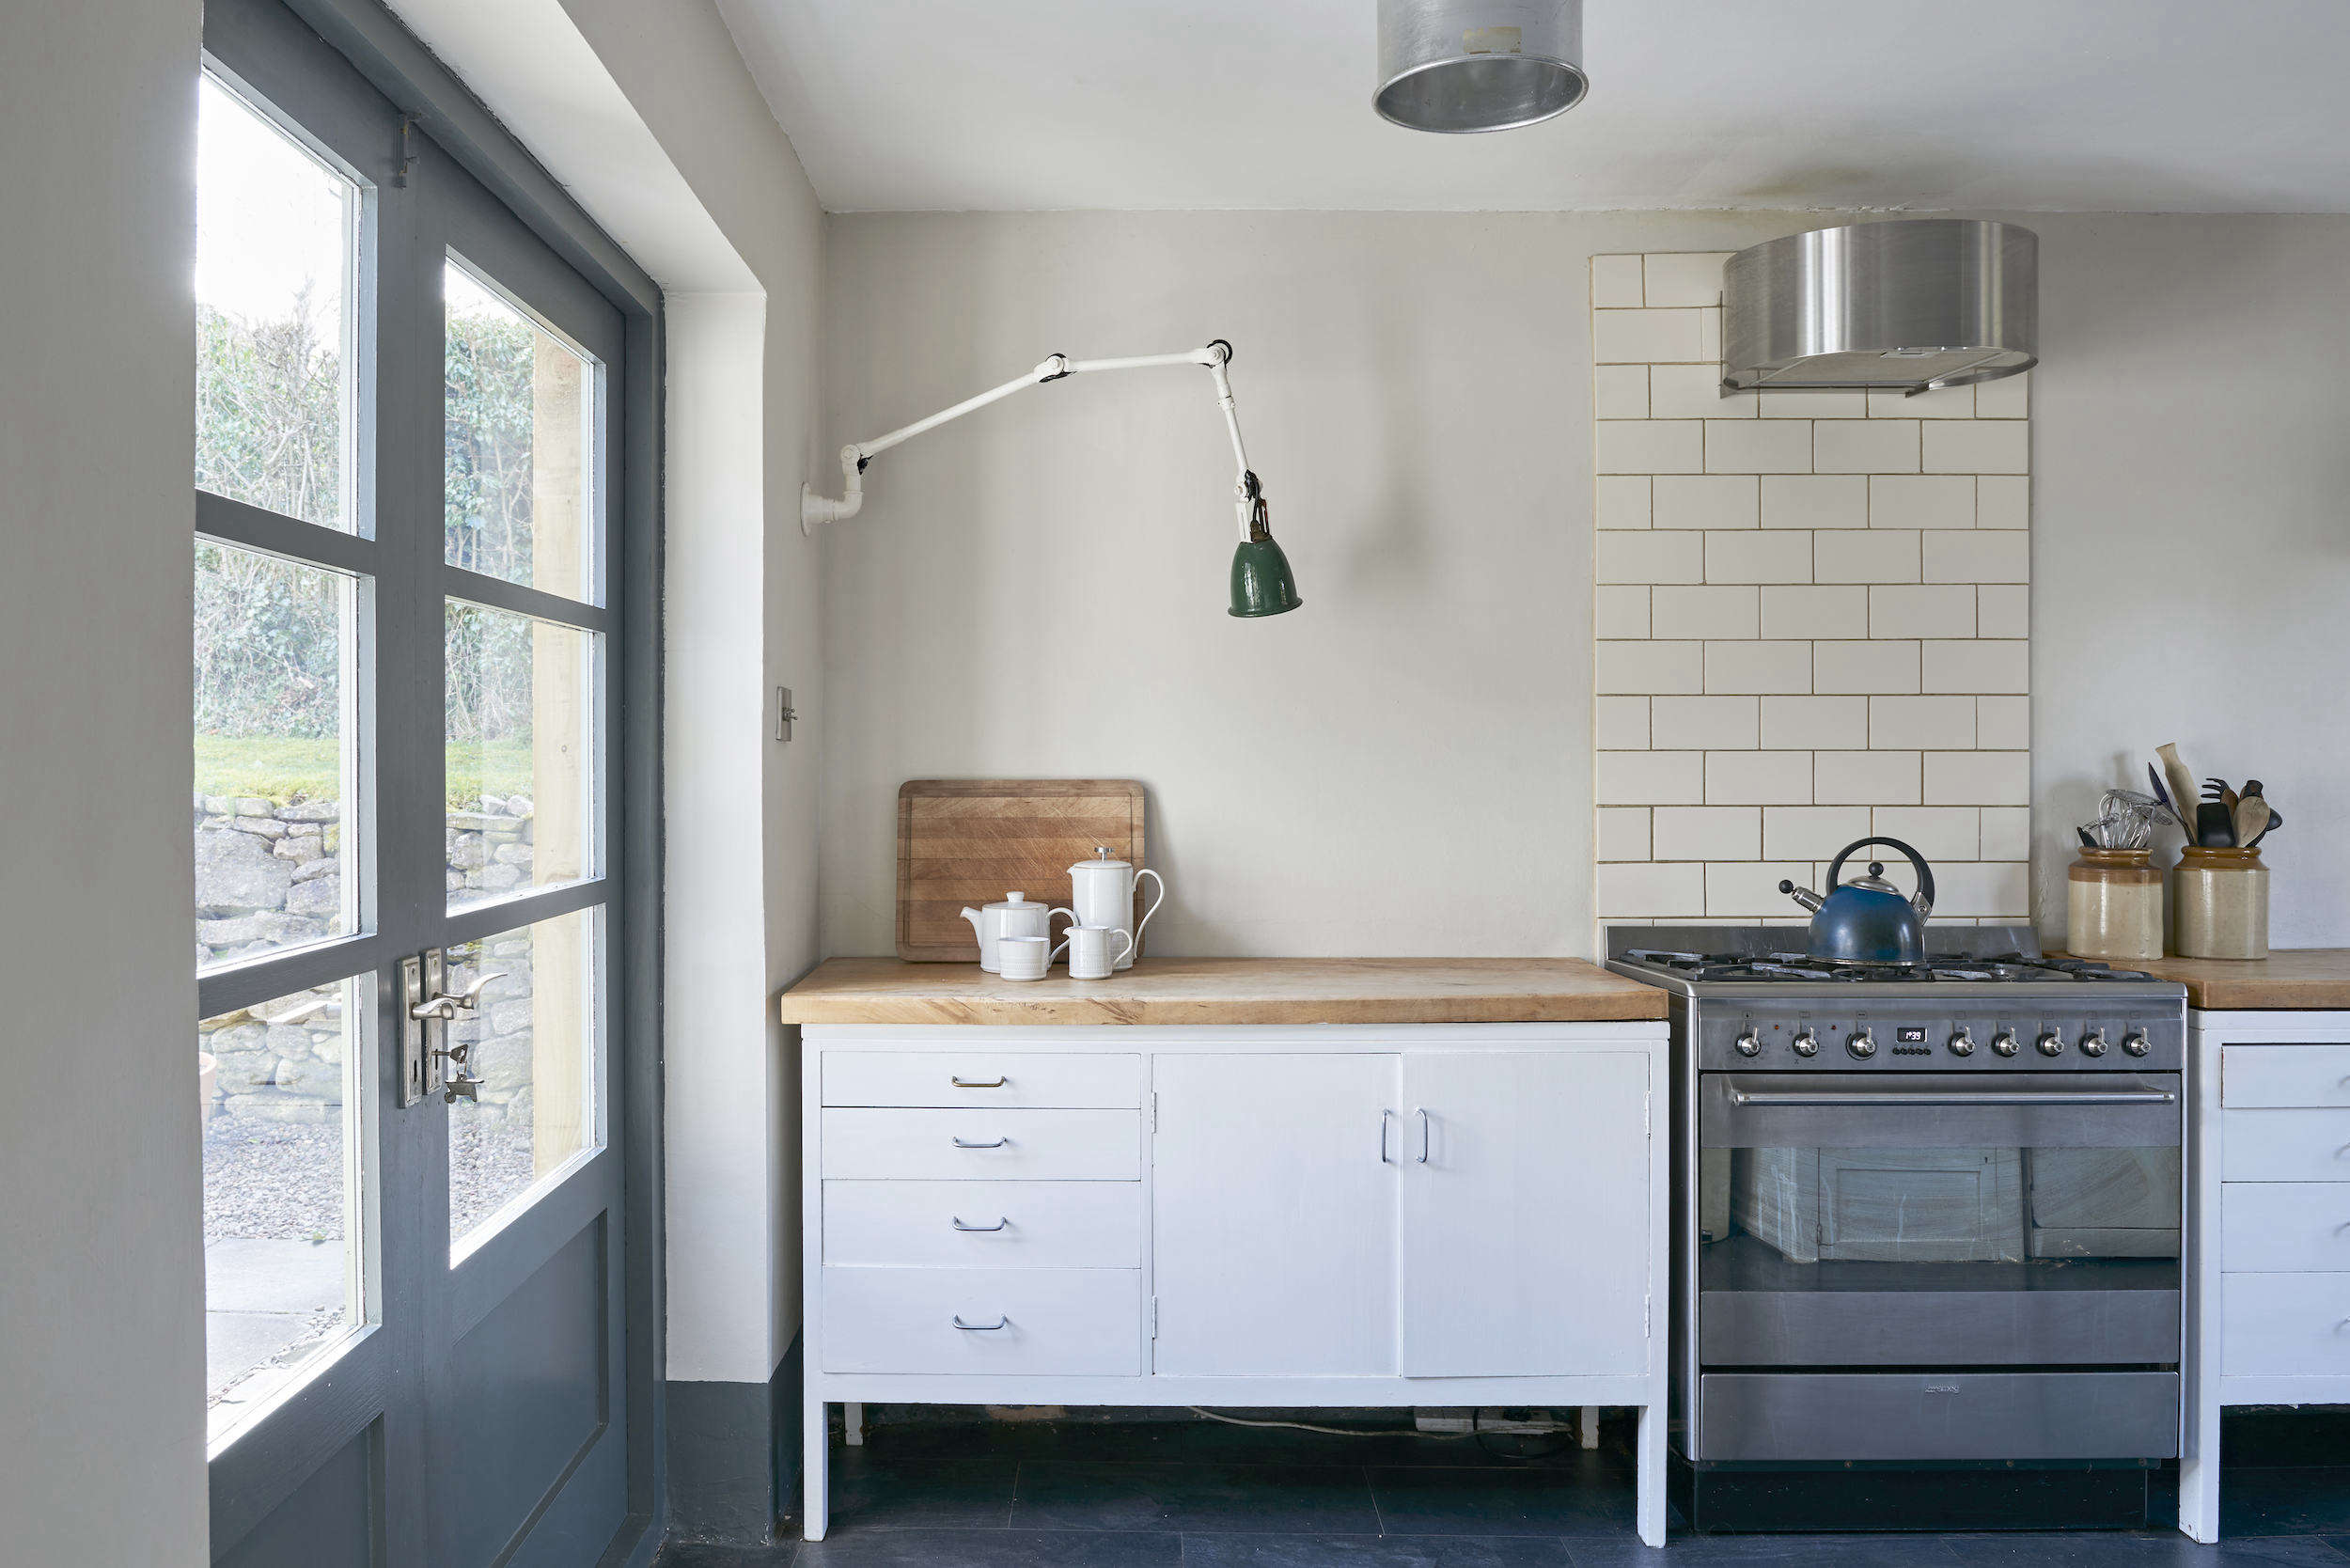 the freestanding smeg range is anchored with a strip of subway tile as a backsp 9